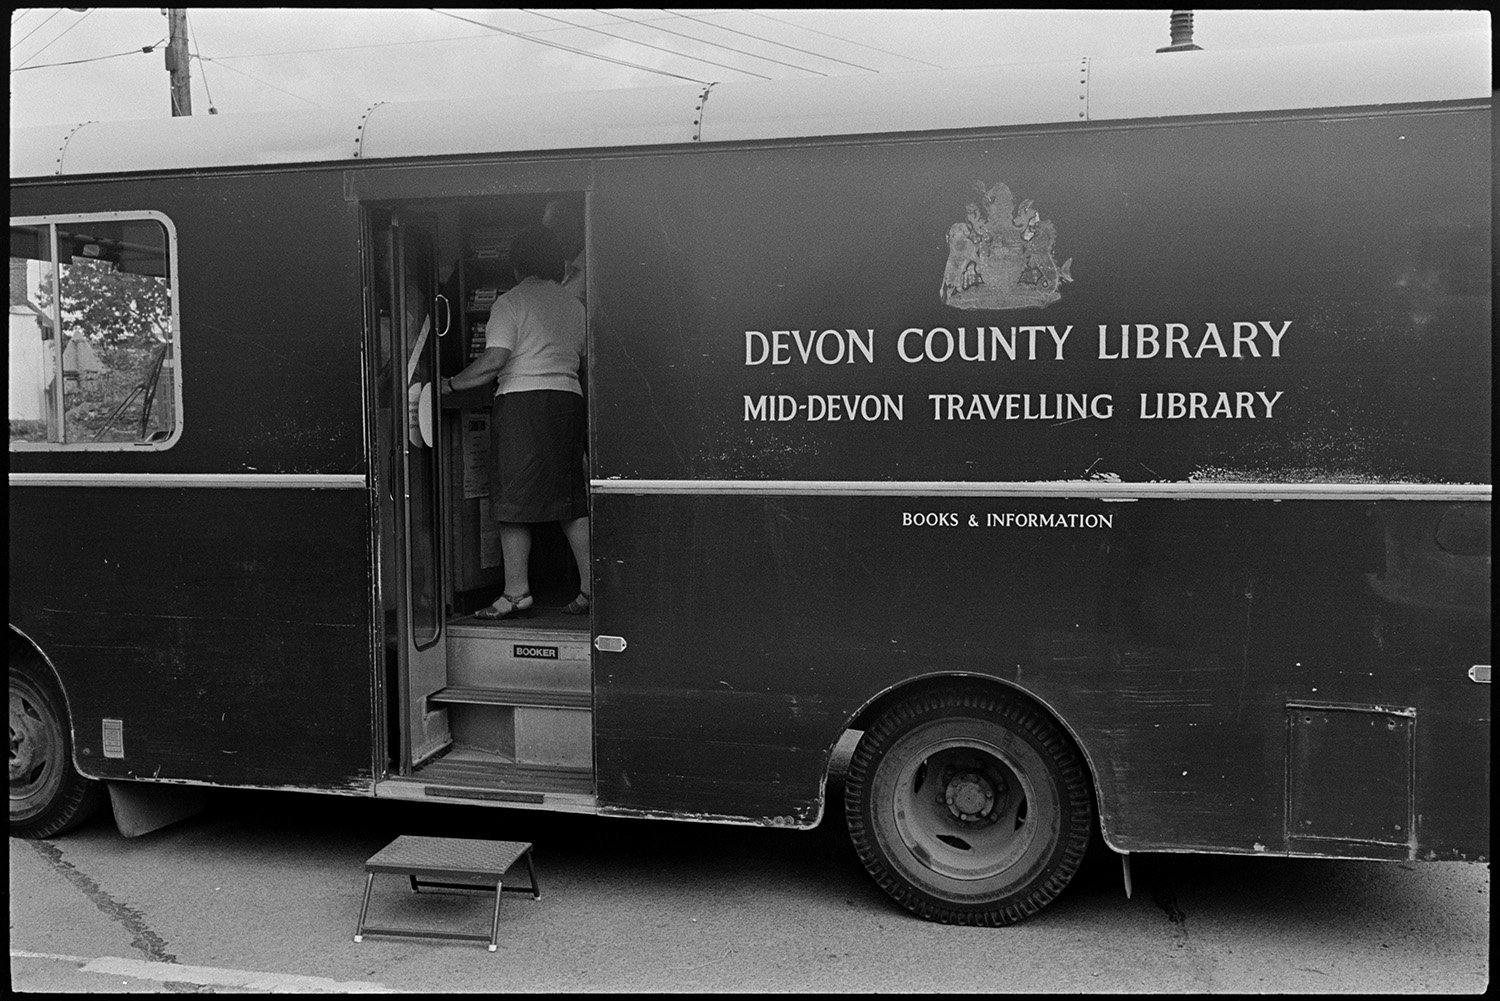 Library van parked in village, women and children after school. 
[The exterior of a library van parked in a street in Dolton. A woman can be seen inside the open doorway.]